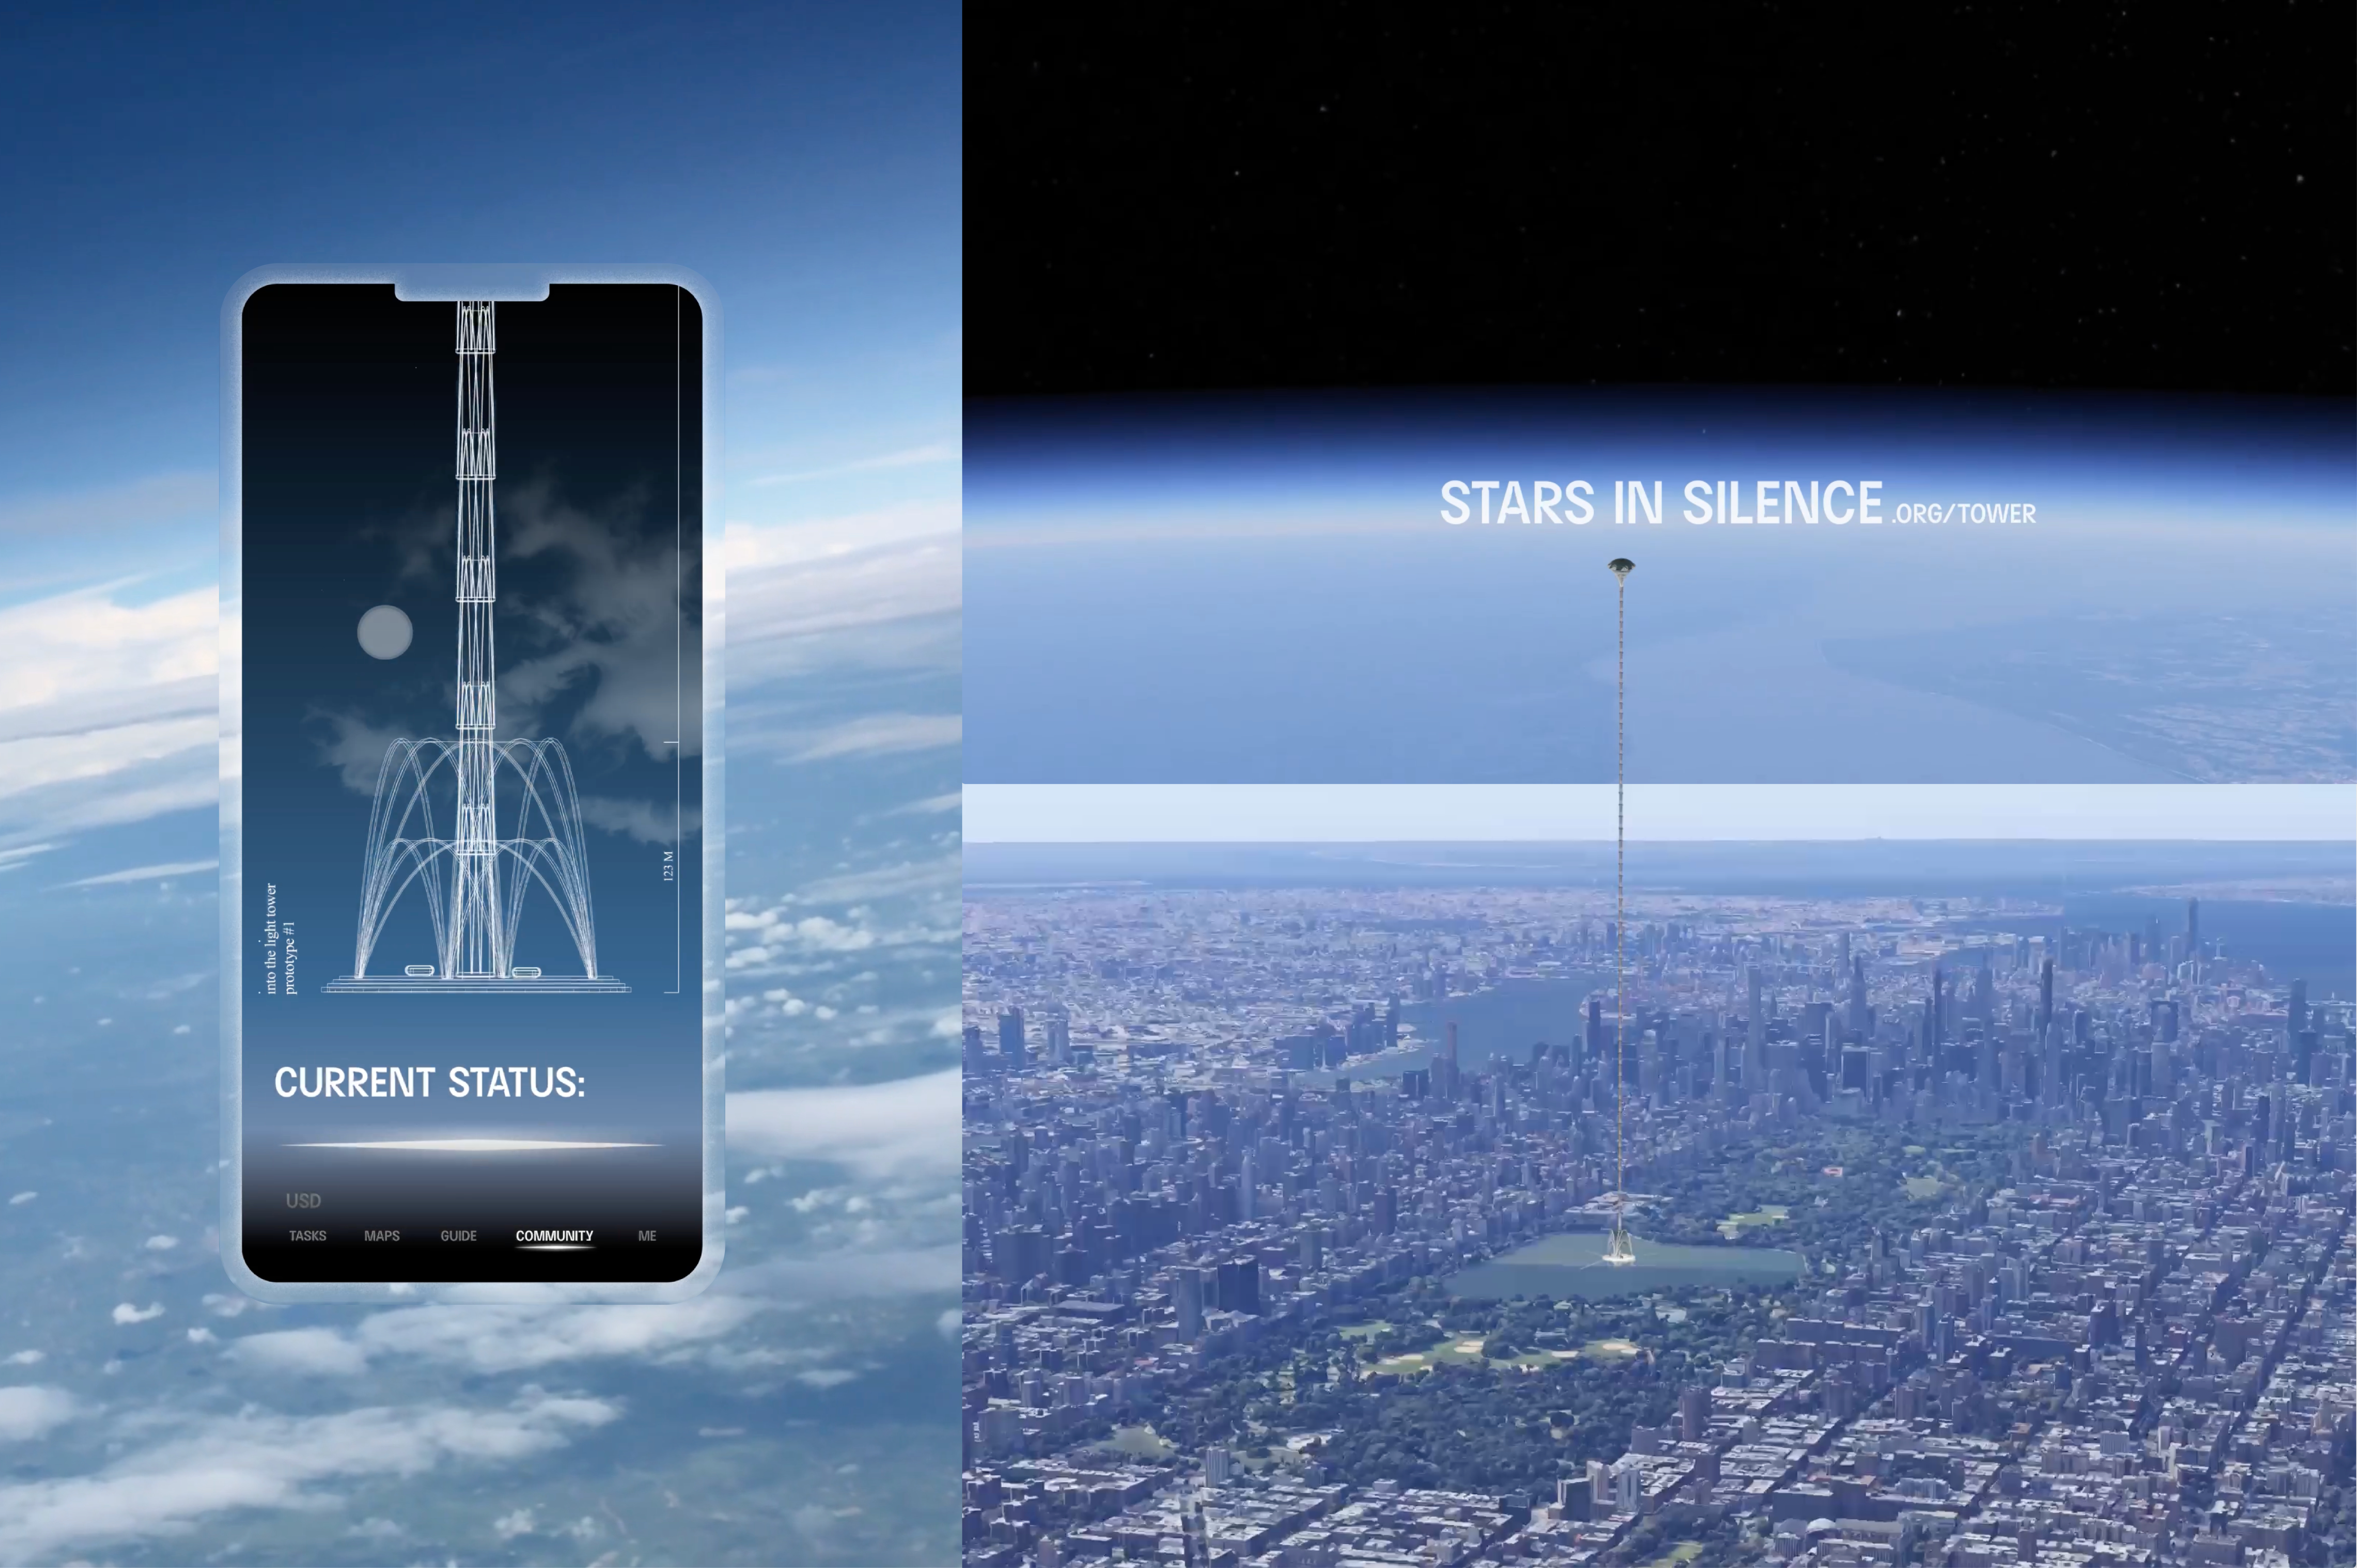 Stars in Silence iphone website mockup and illustration of tower for viewing stars